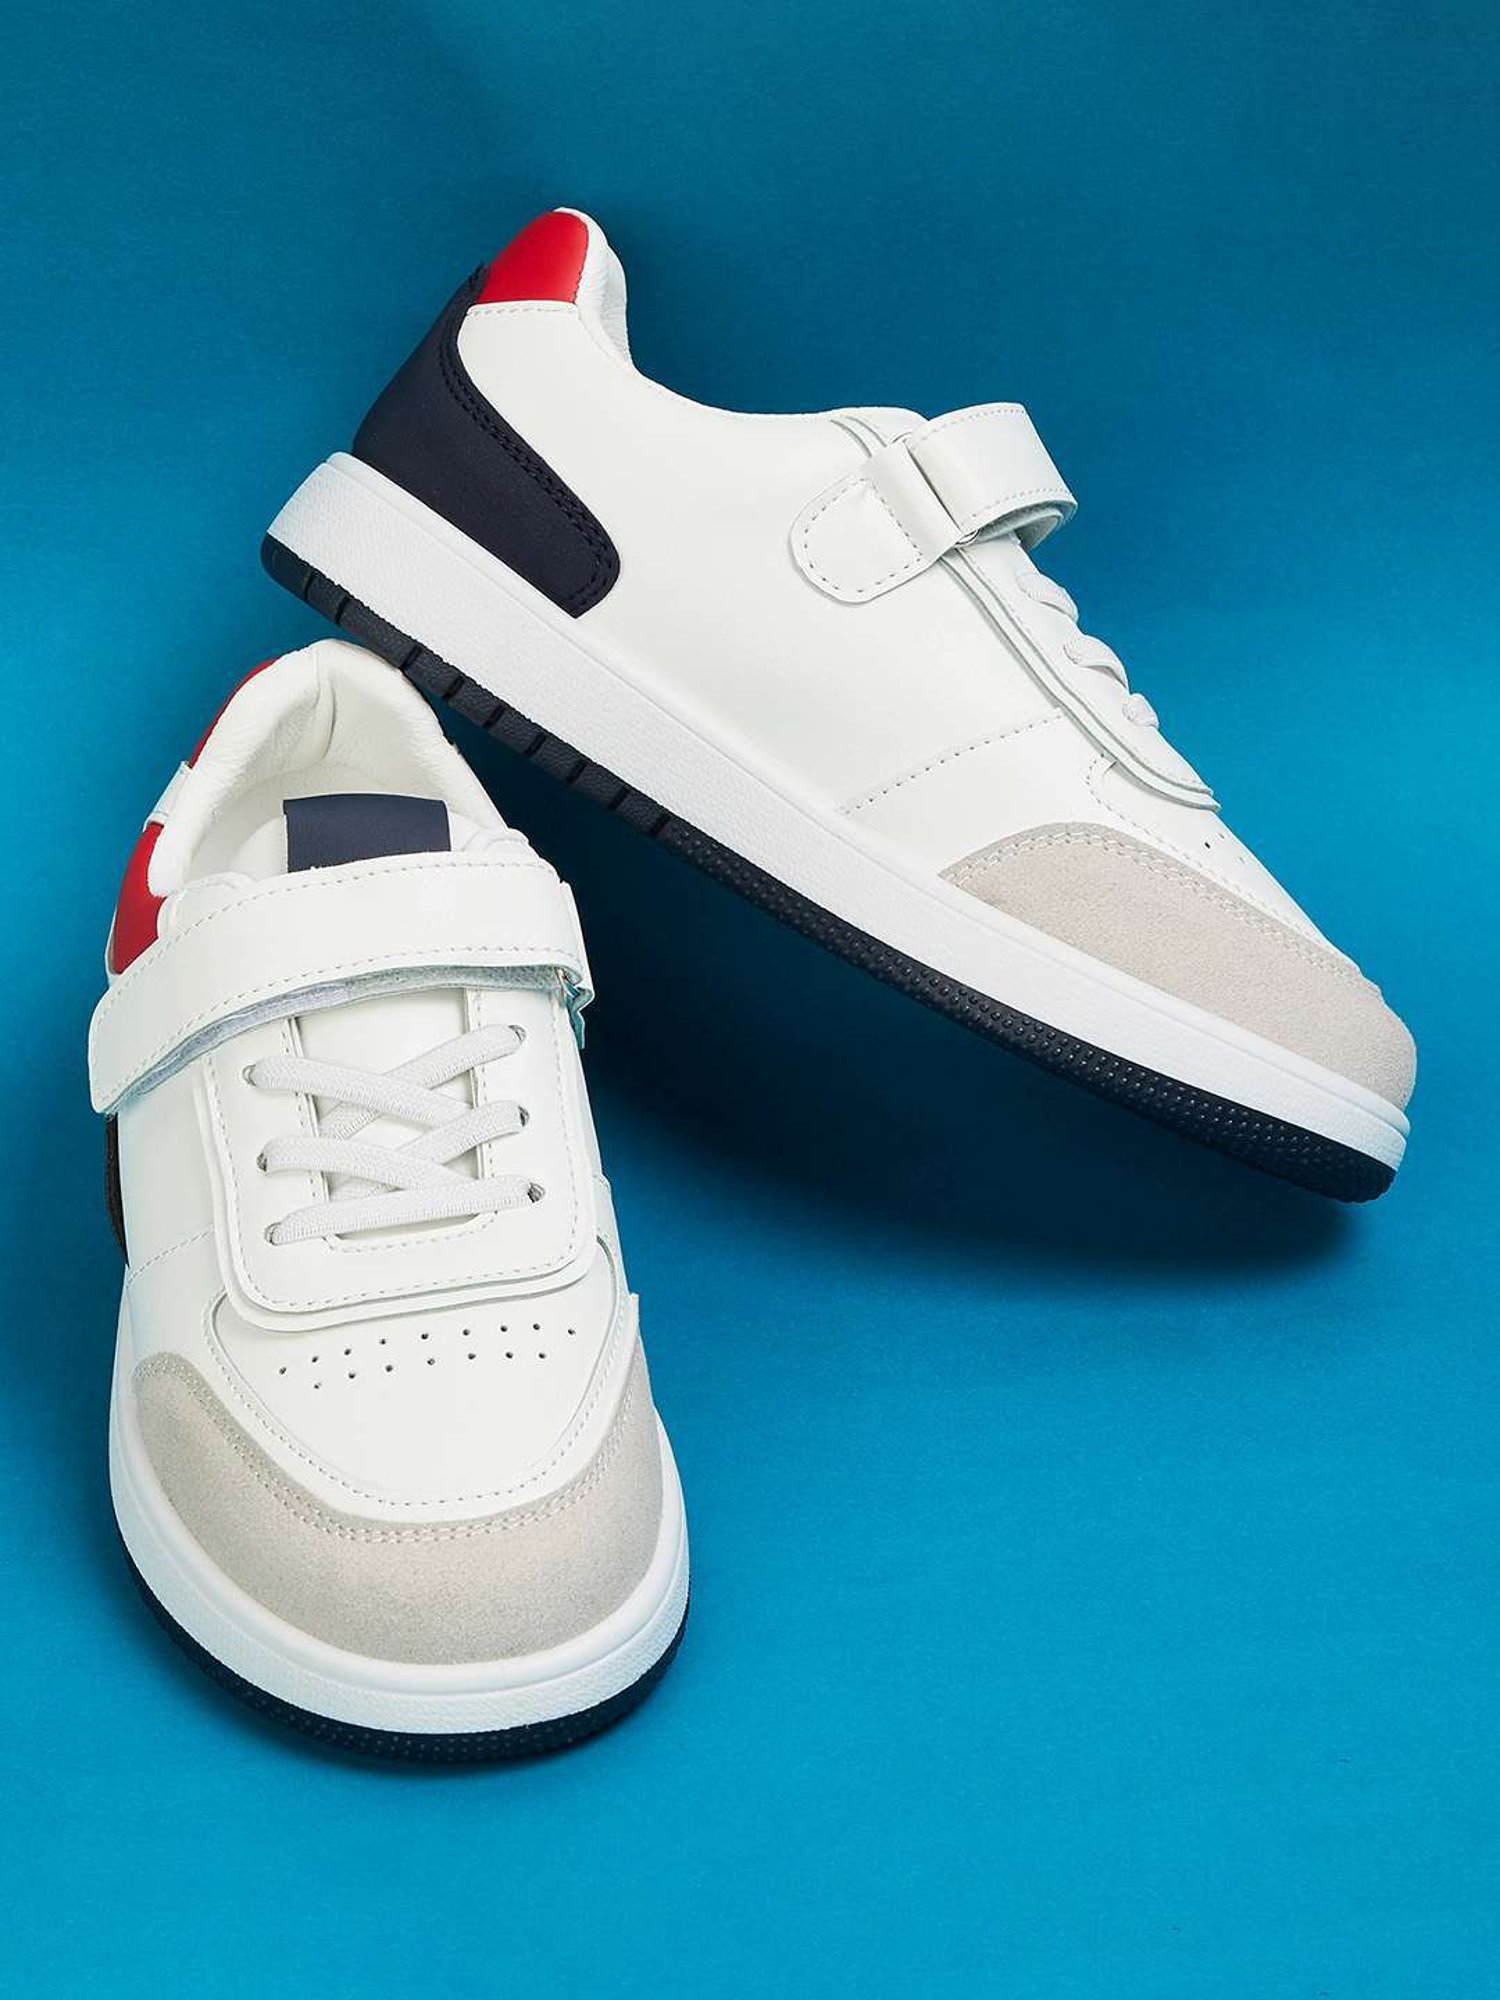 Color: White Kids Sneaker Shoes at Rs 185/pair in Delhi | ID: 2851315693991